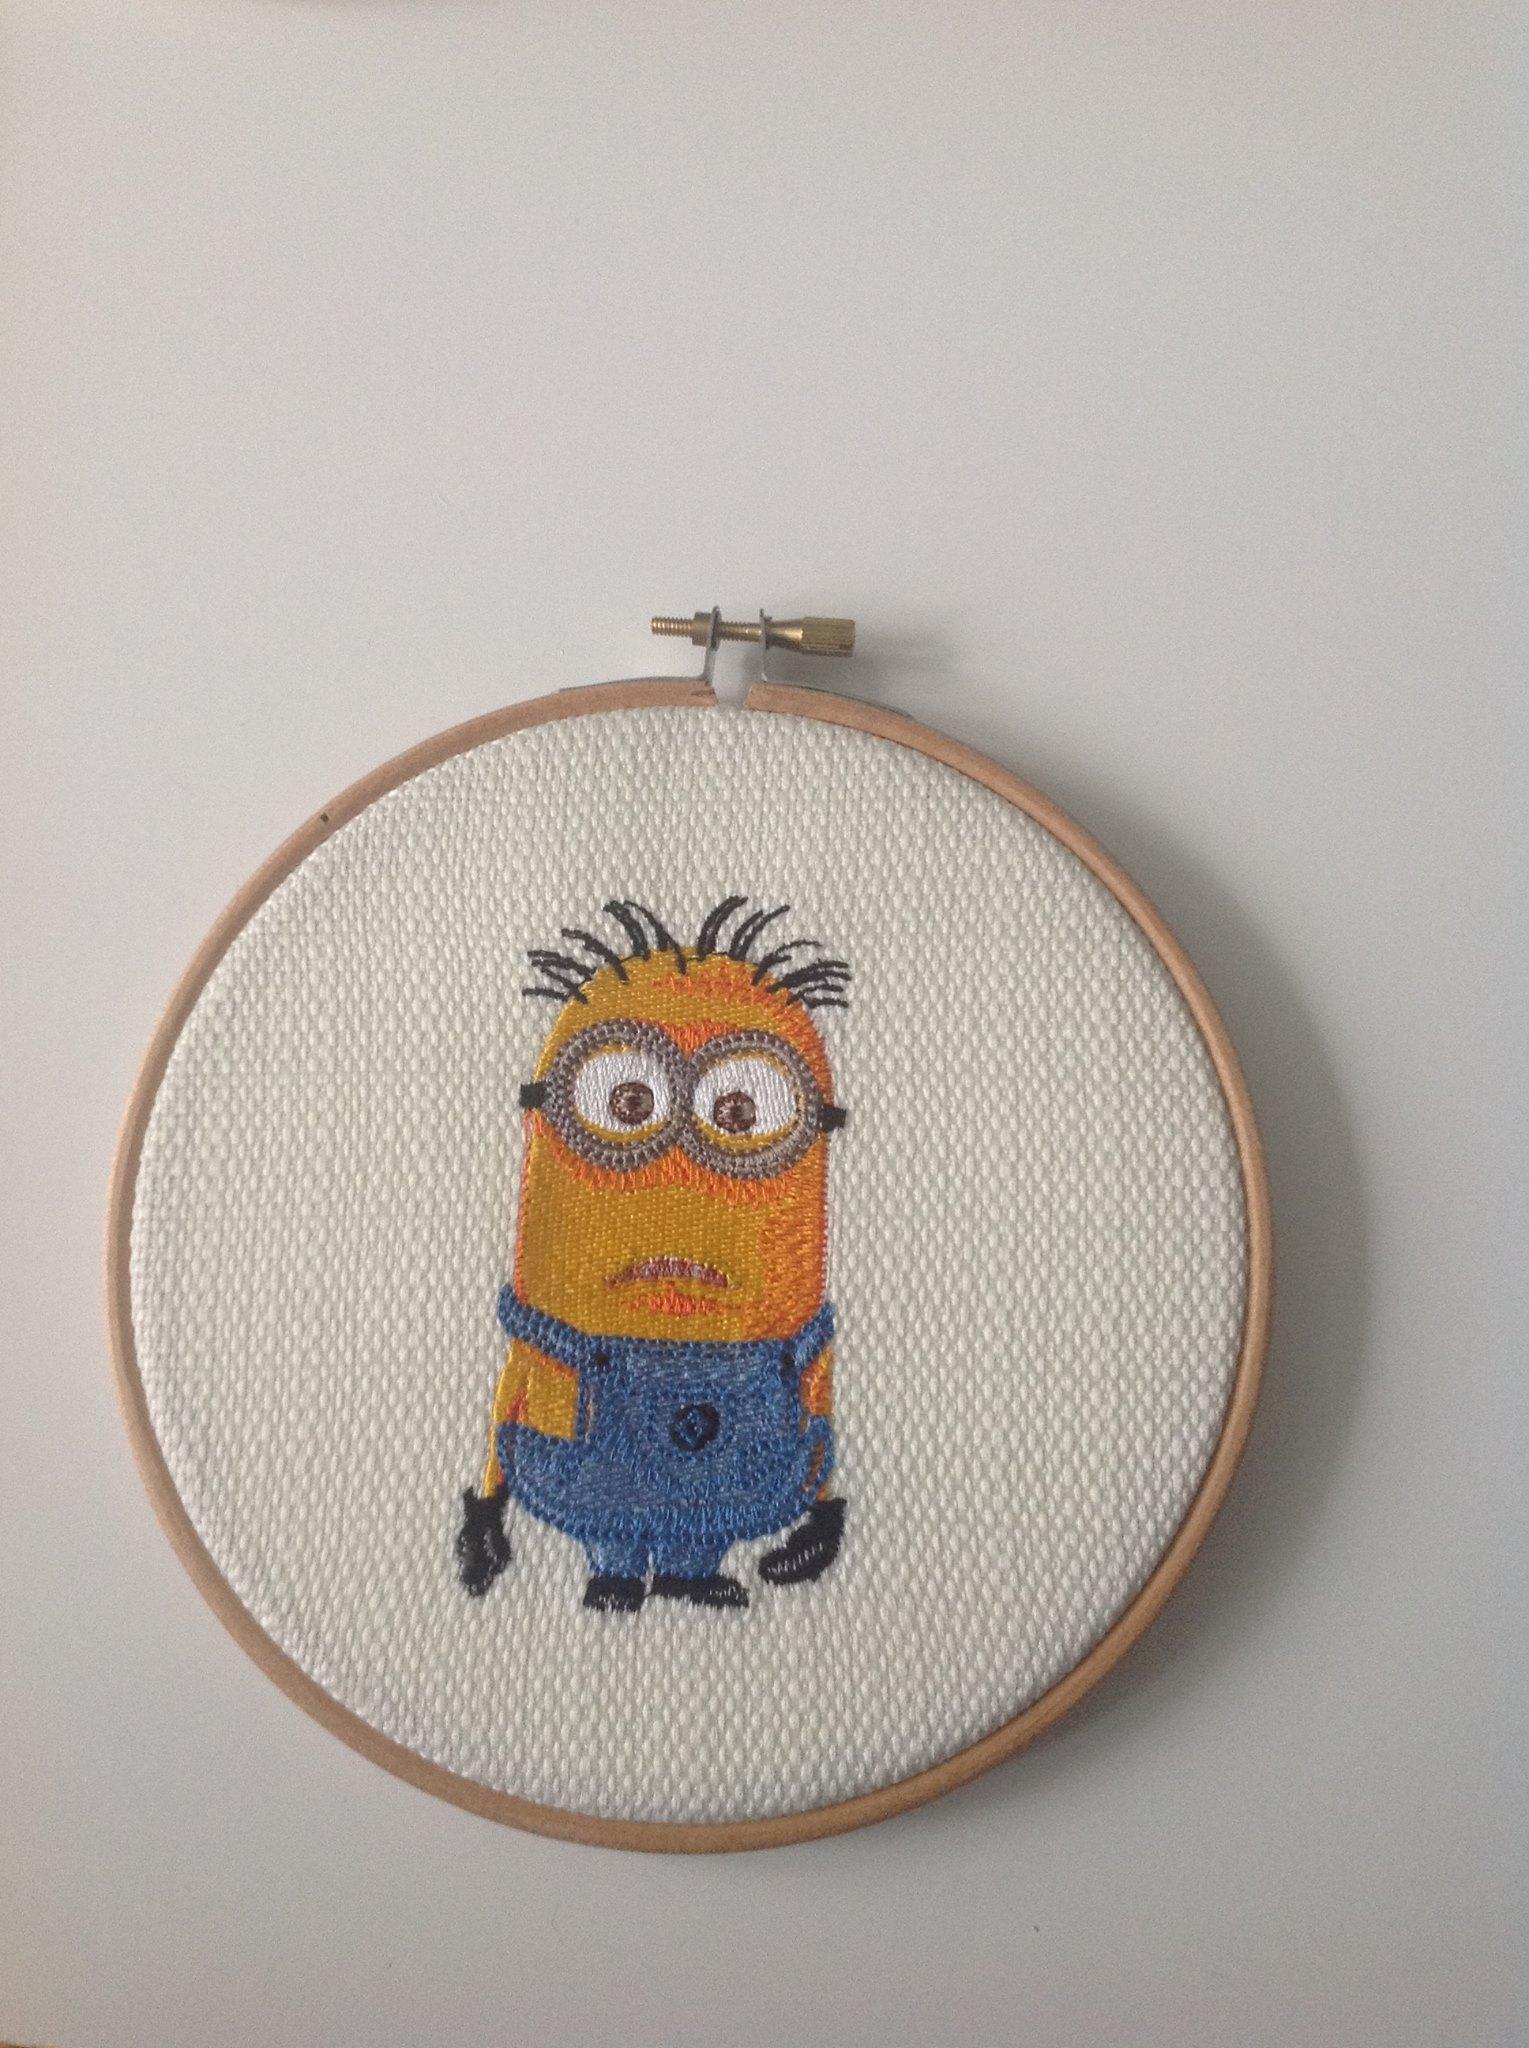 Framed minion embroidery design